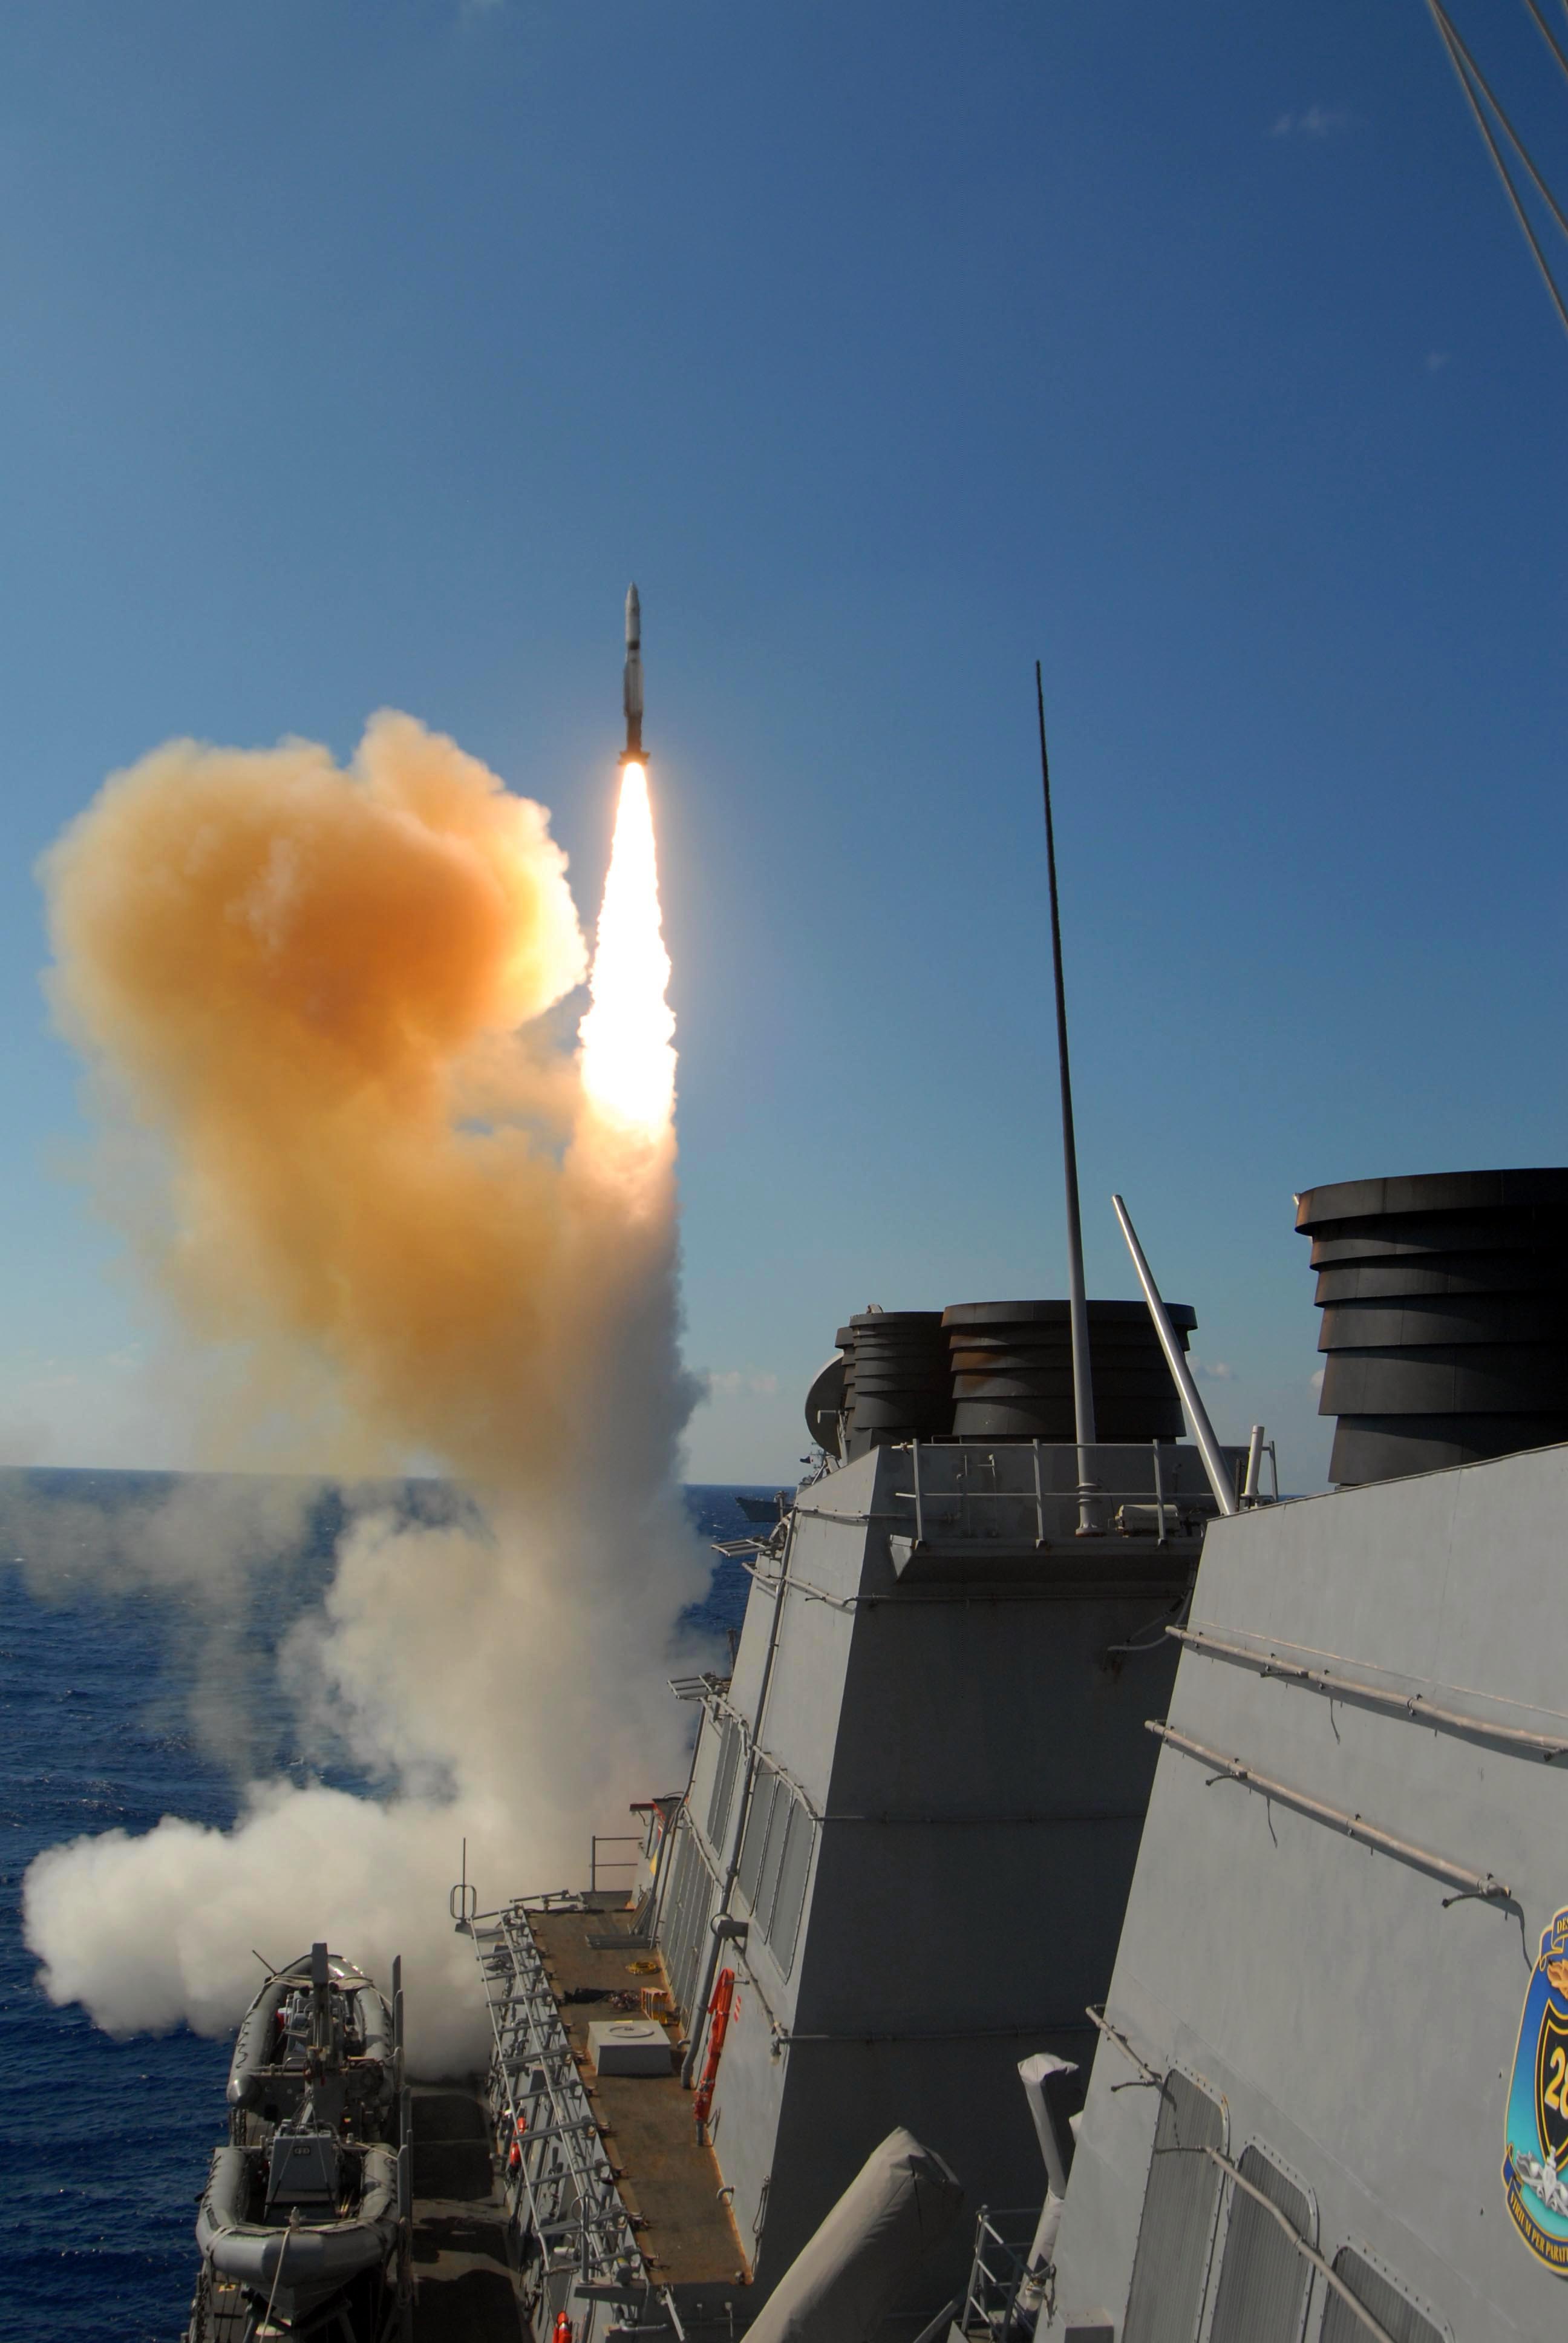 US_Navy_081006-N-9911M-031_The_Arleigh_Burke-class_guided_missile_destroyer_USS_Stout_(DDG_55)_launches_a_SM-2_Standard_Missile_from_the_aft_missile_bay_aboard_at_the_ex-USS_O'Bannon_(DD_987)_during_a_sinking_exercise.jpg